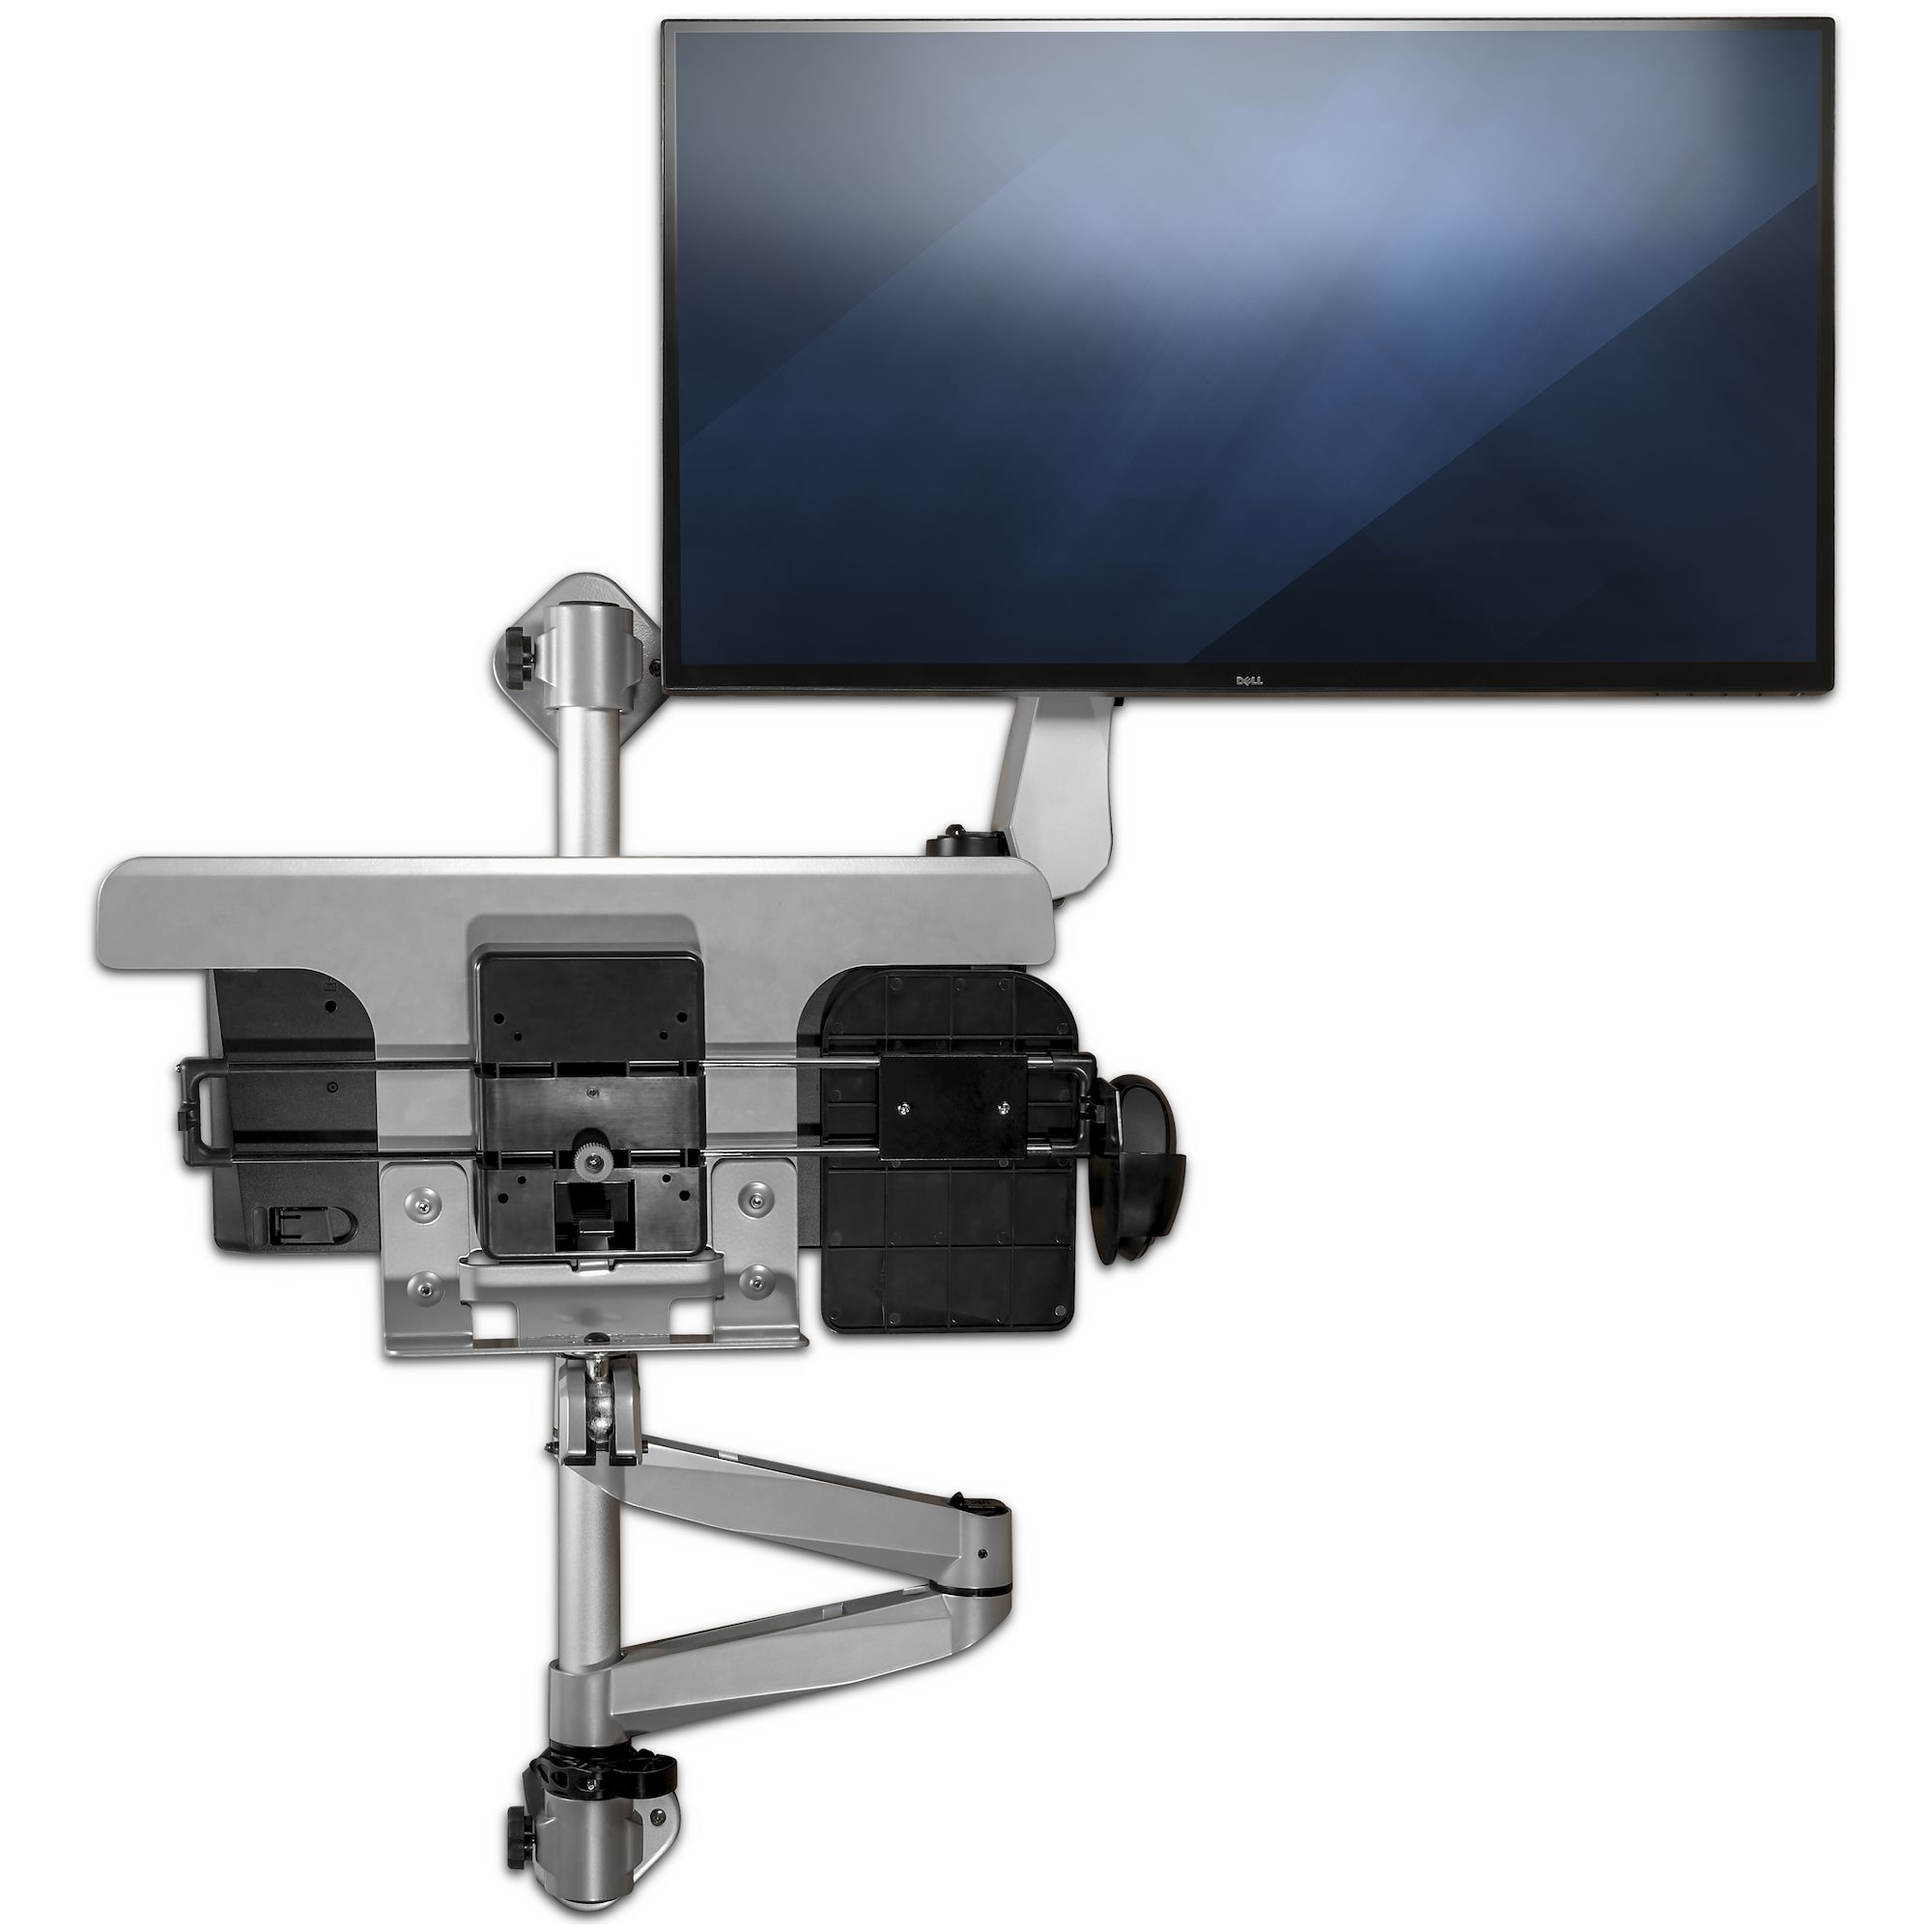 Wall Mount Workstation - Articulating Standing Desk w/ Ergonomic Height Adjustable  Monitor Arm & Padded Keyboard Tray - 34 VESA Display - Foldable Wall Mounted  Sit Stand - BCI Imaging Supplies